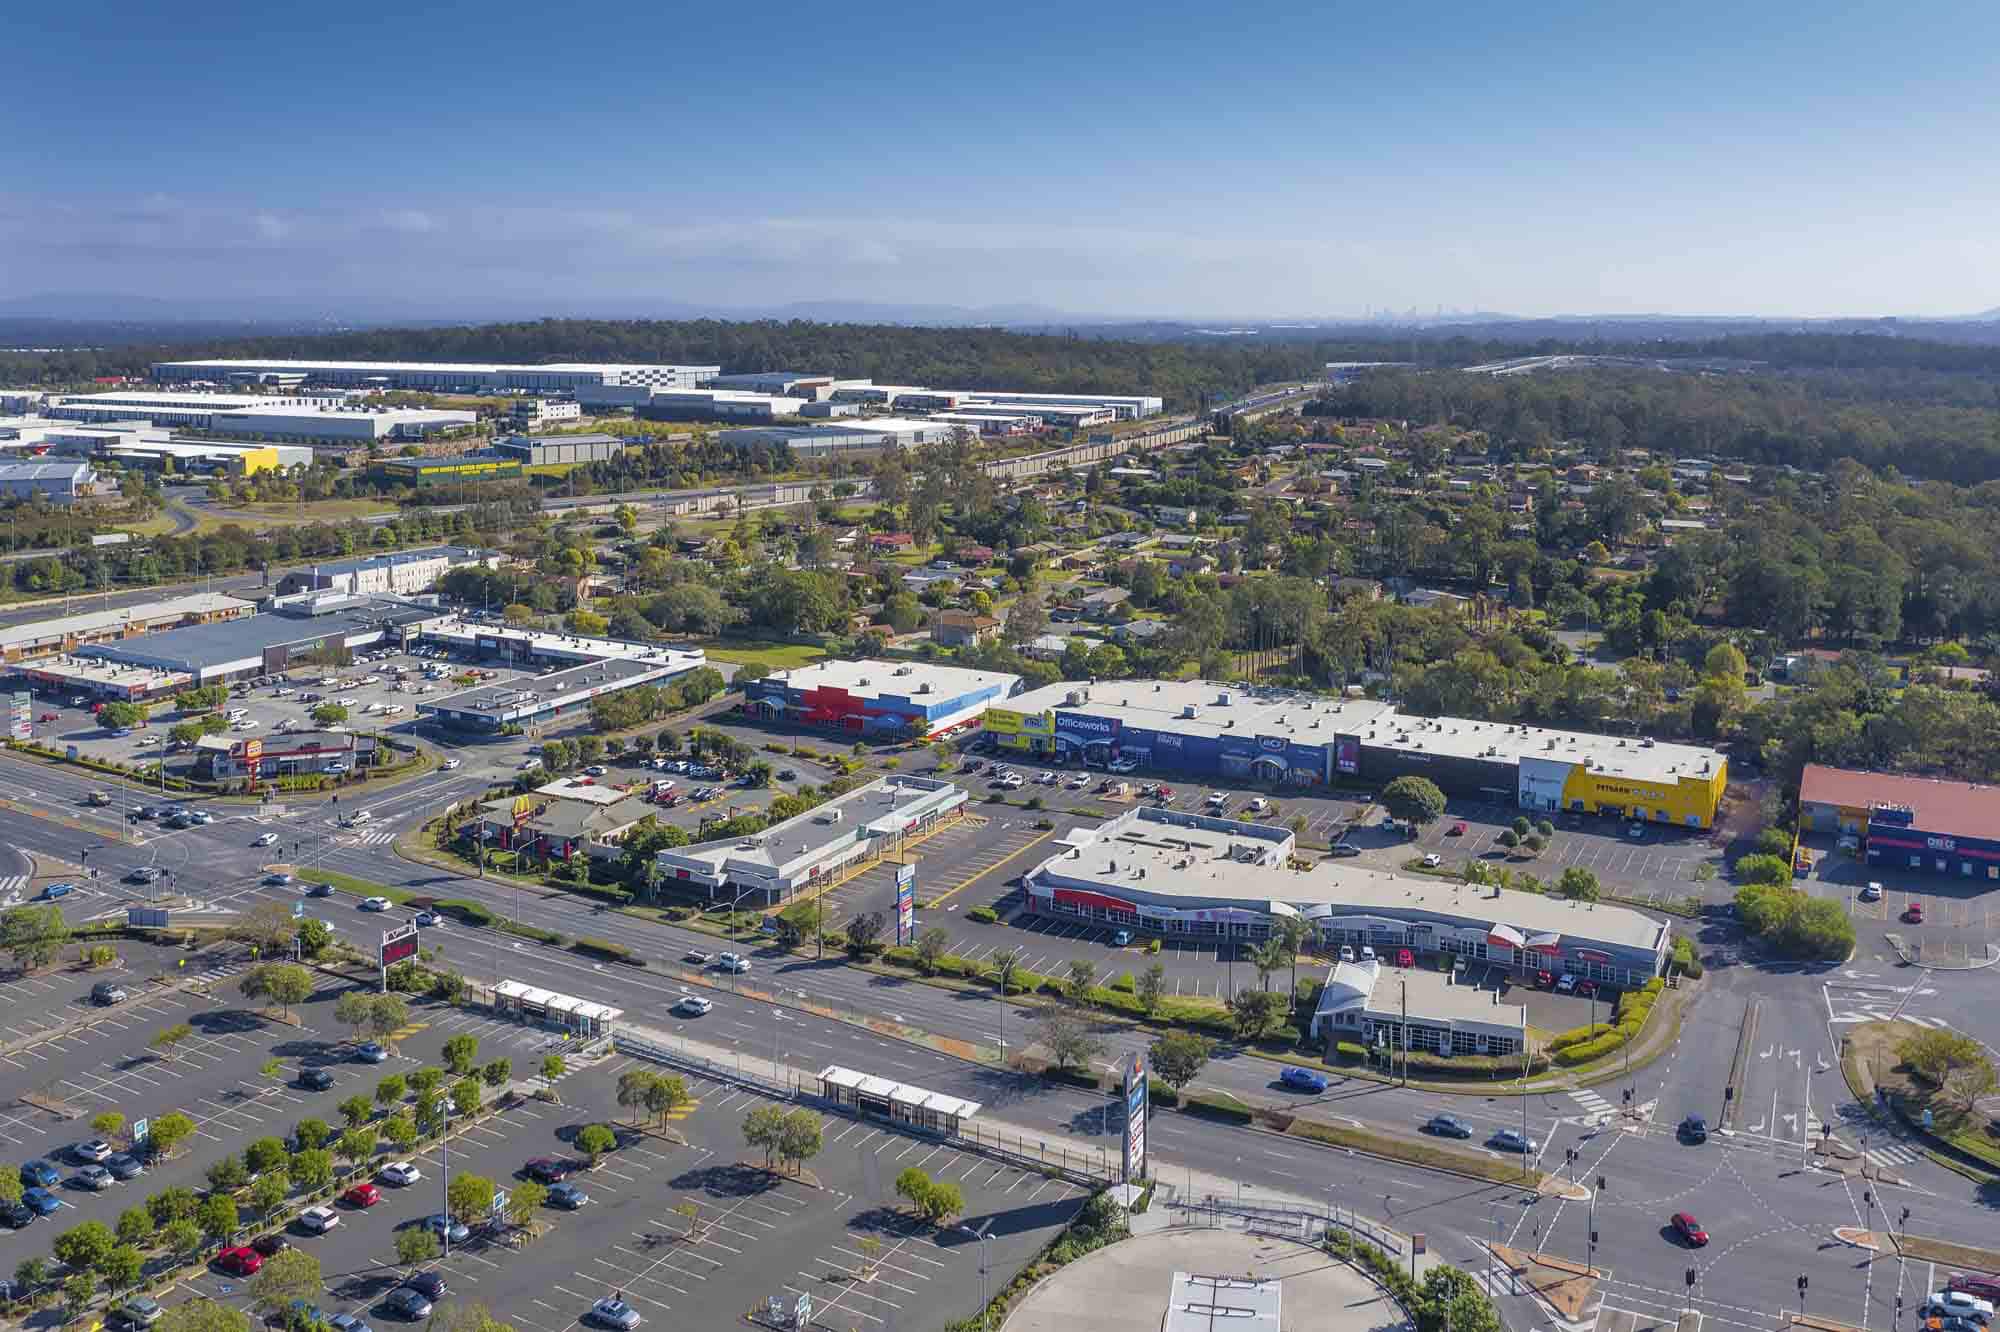 Drone photography for large format retail building at Browns Plains